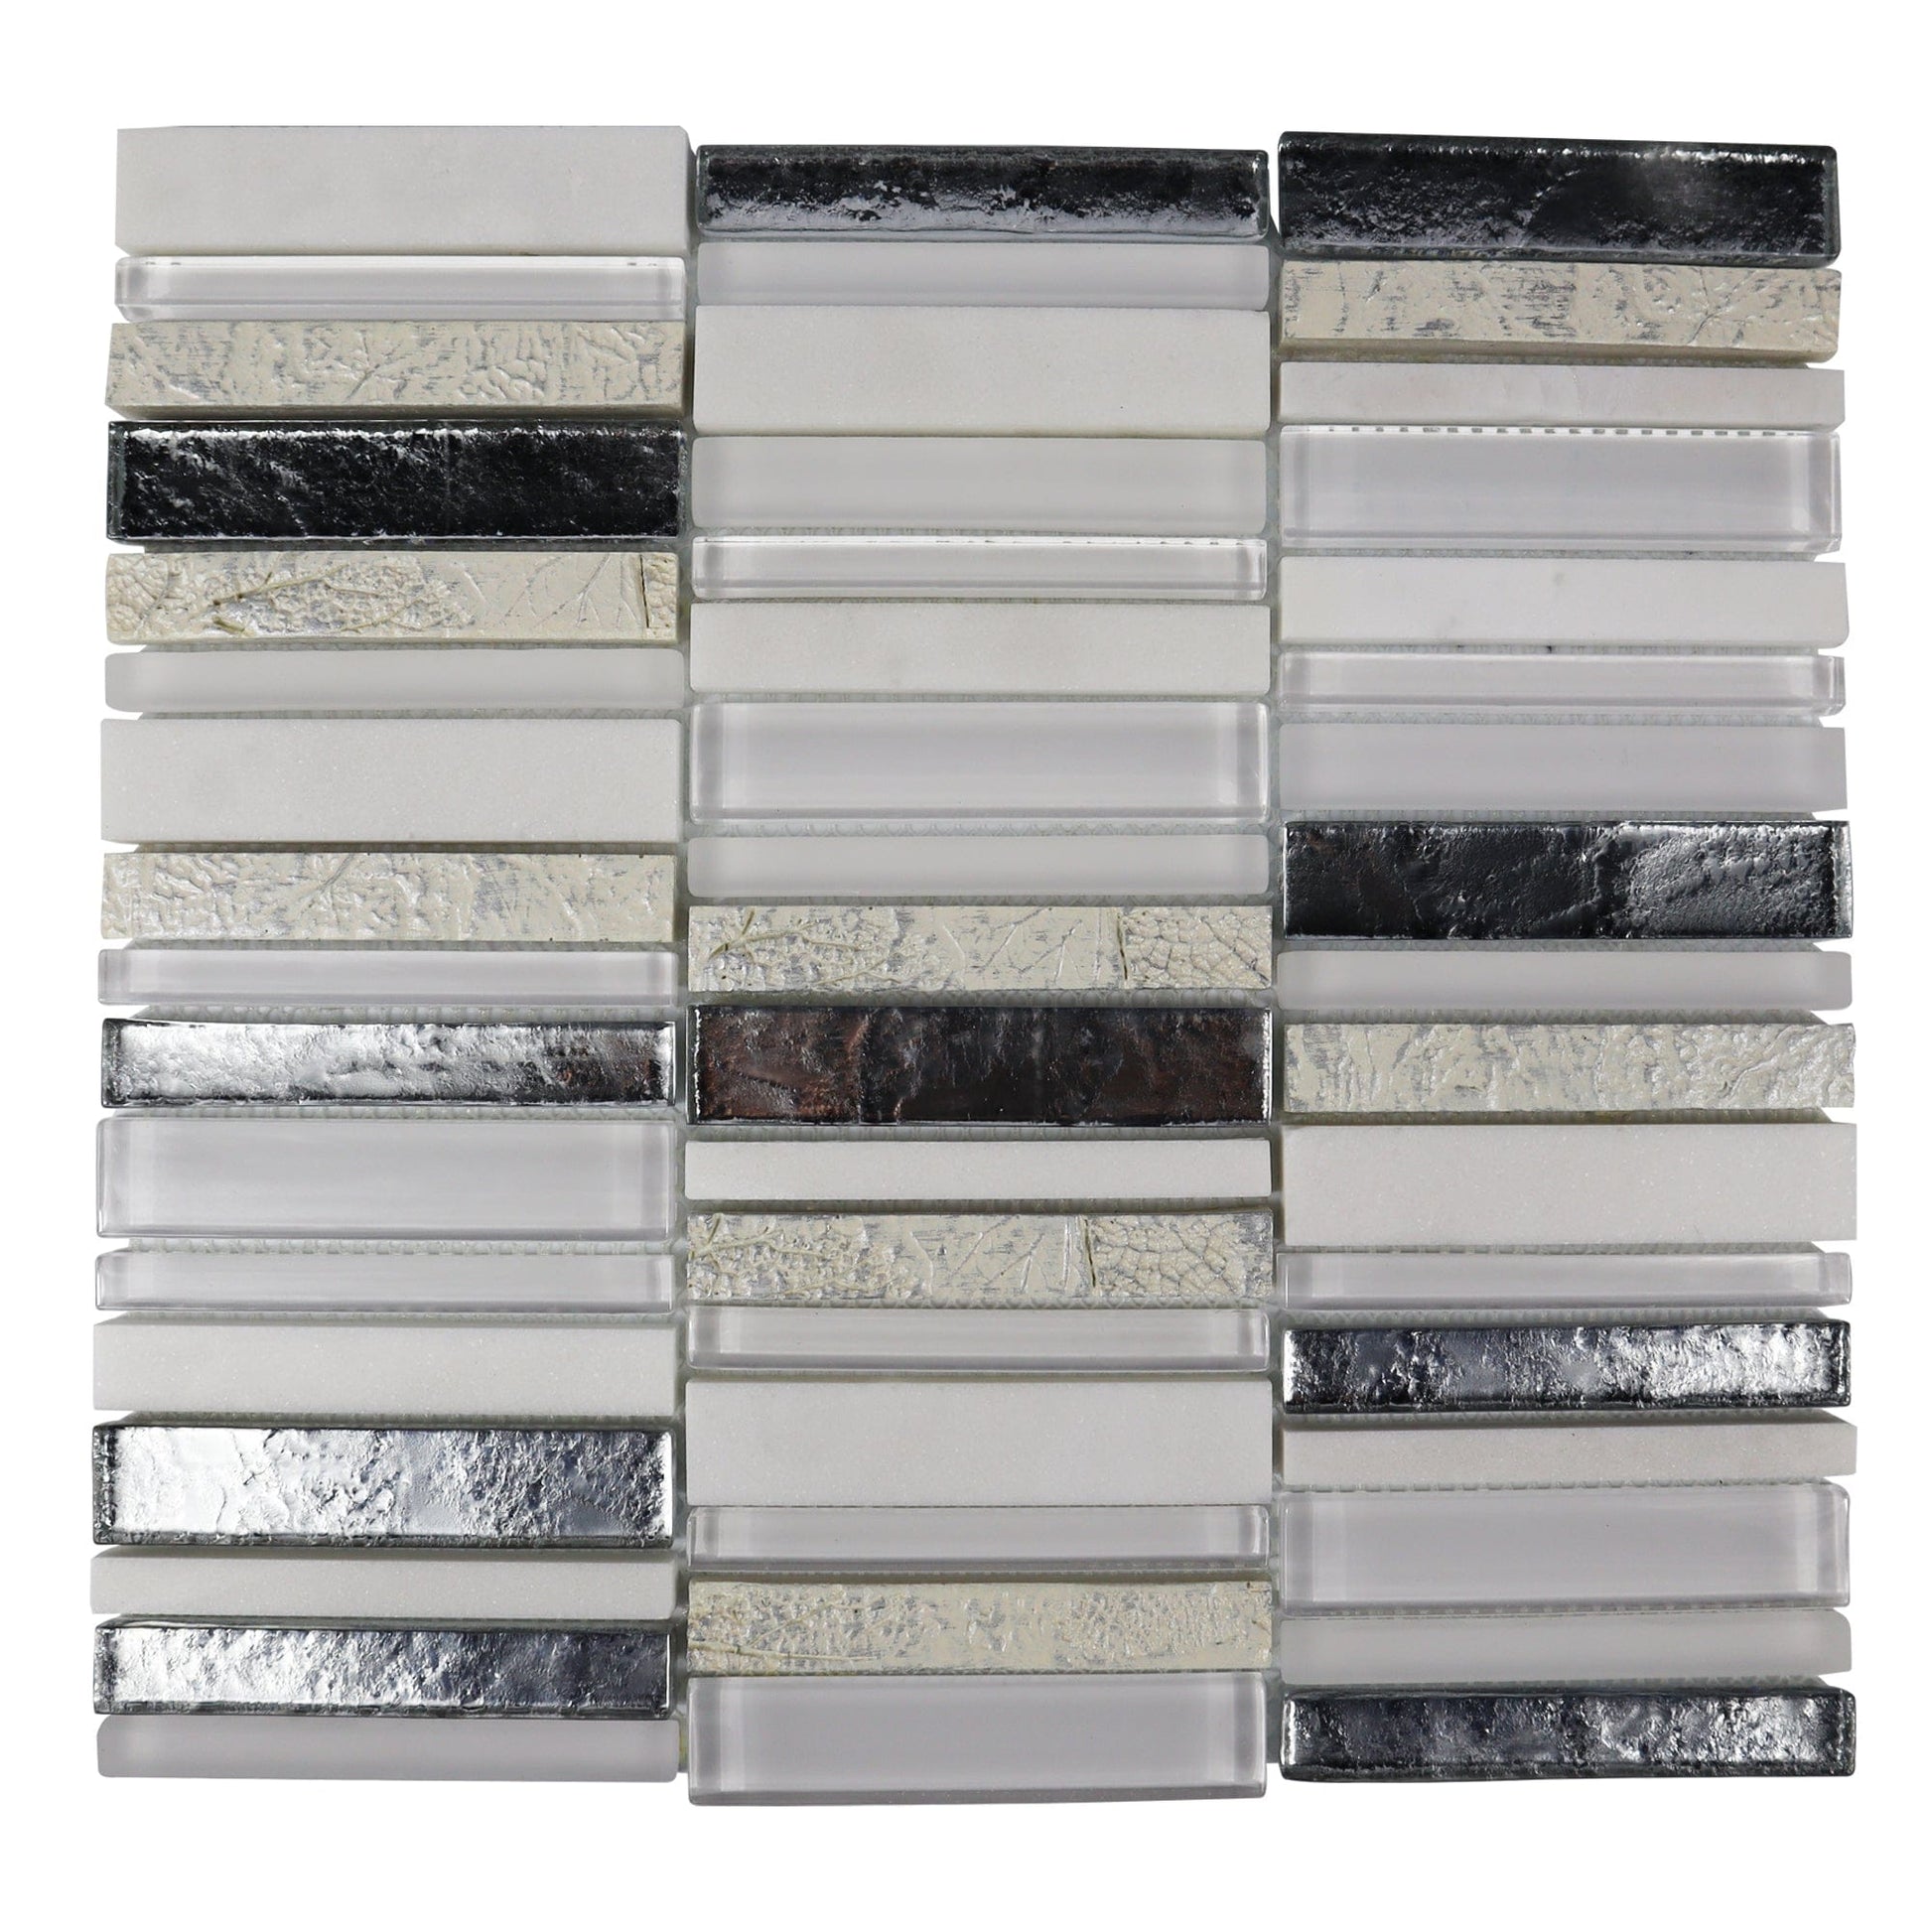 shop for white Mounted Mosaic Tile 12 x 12